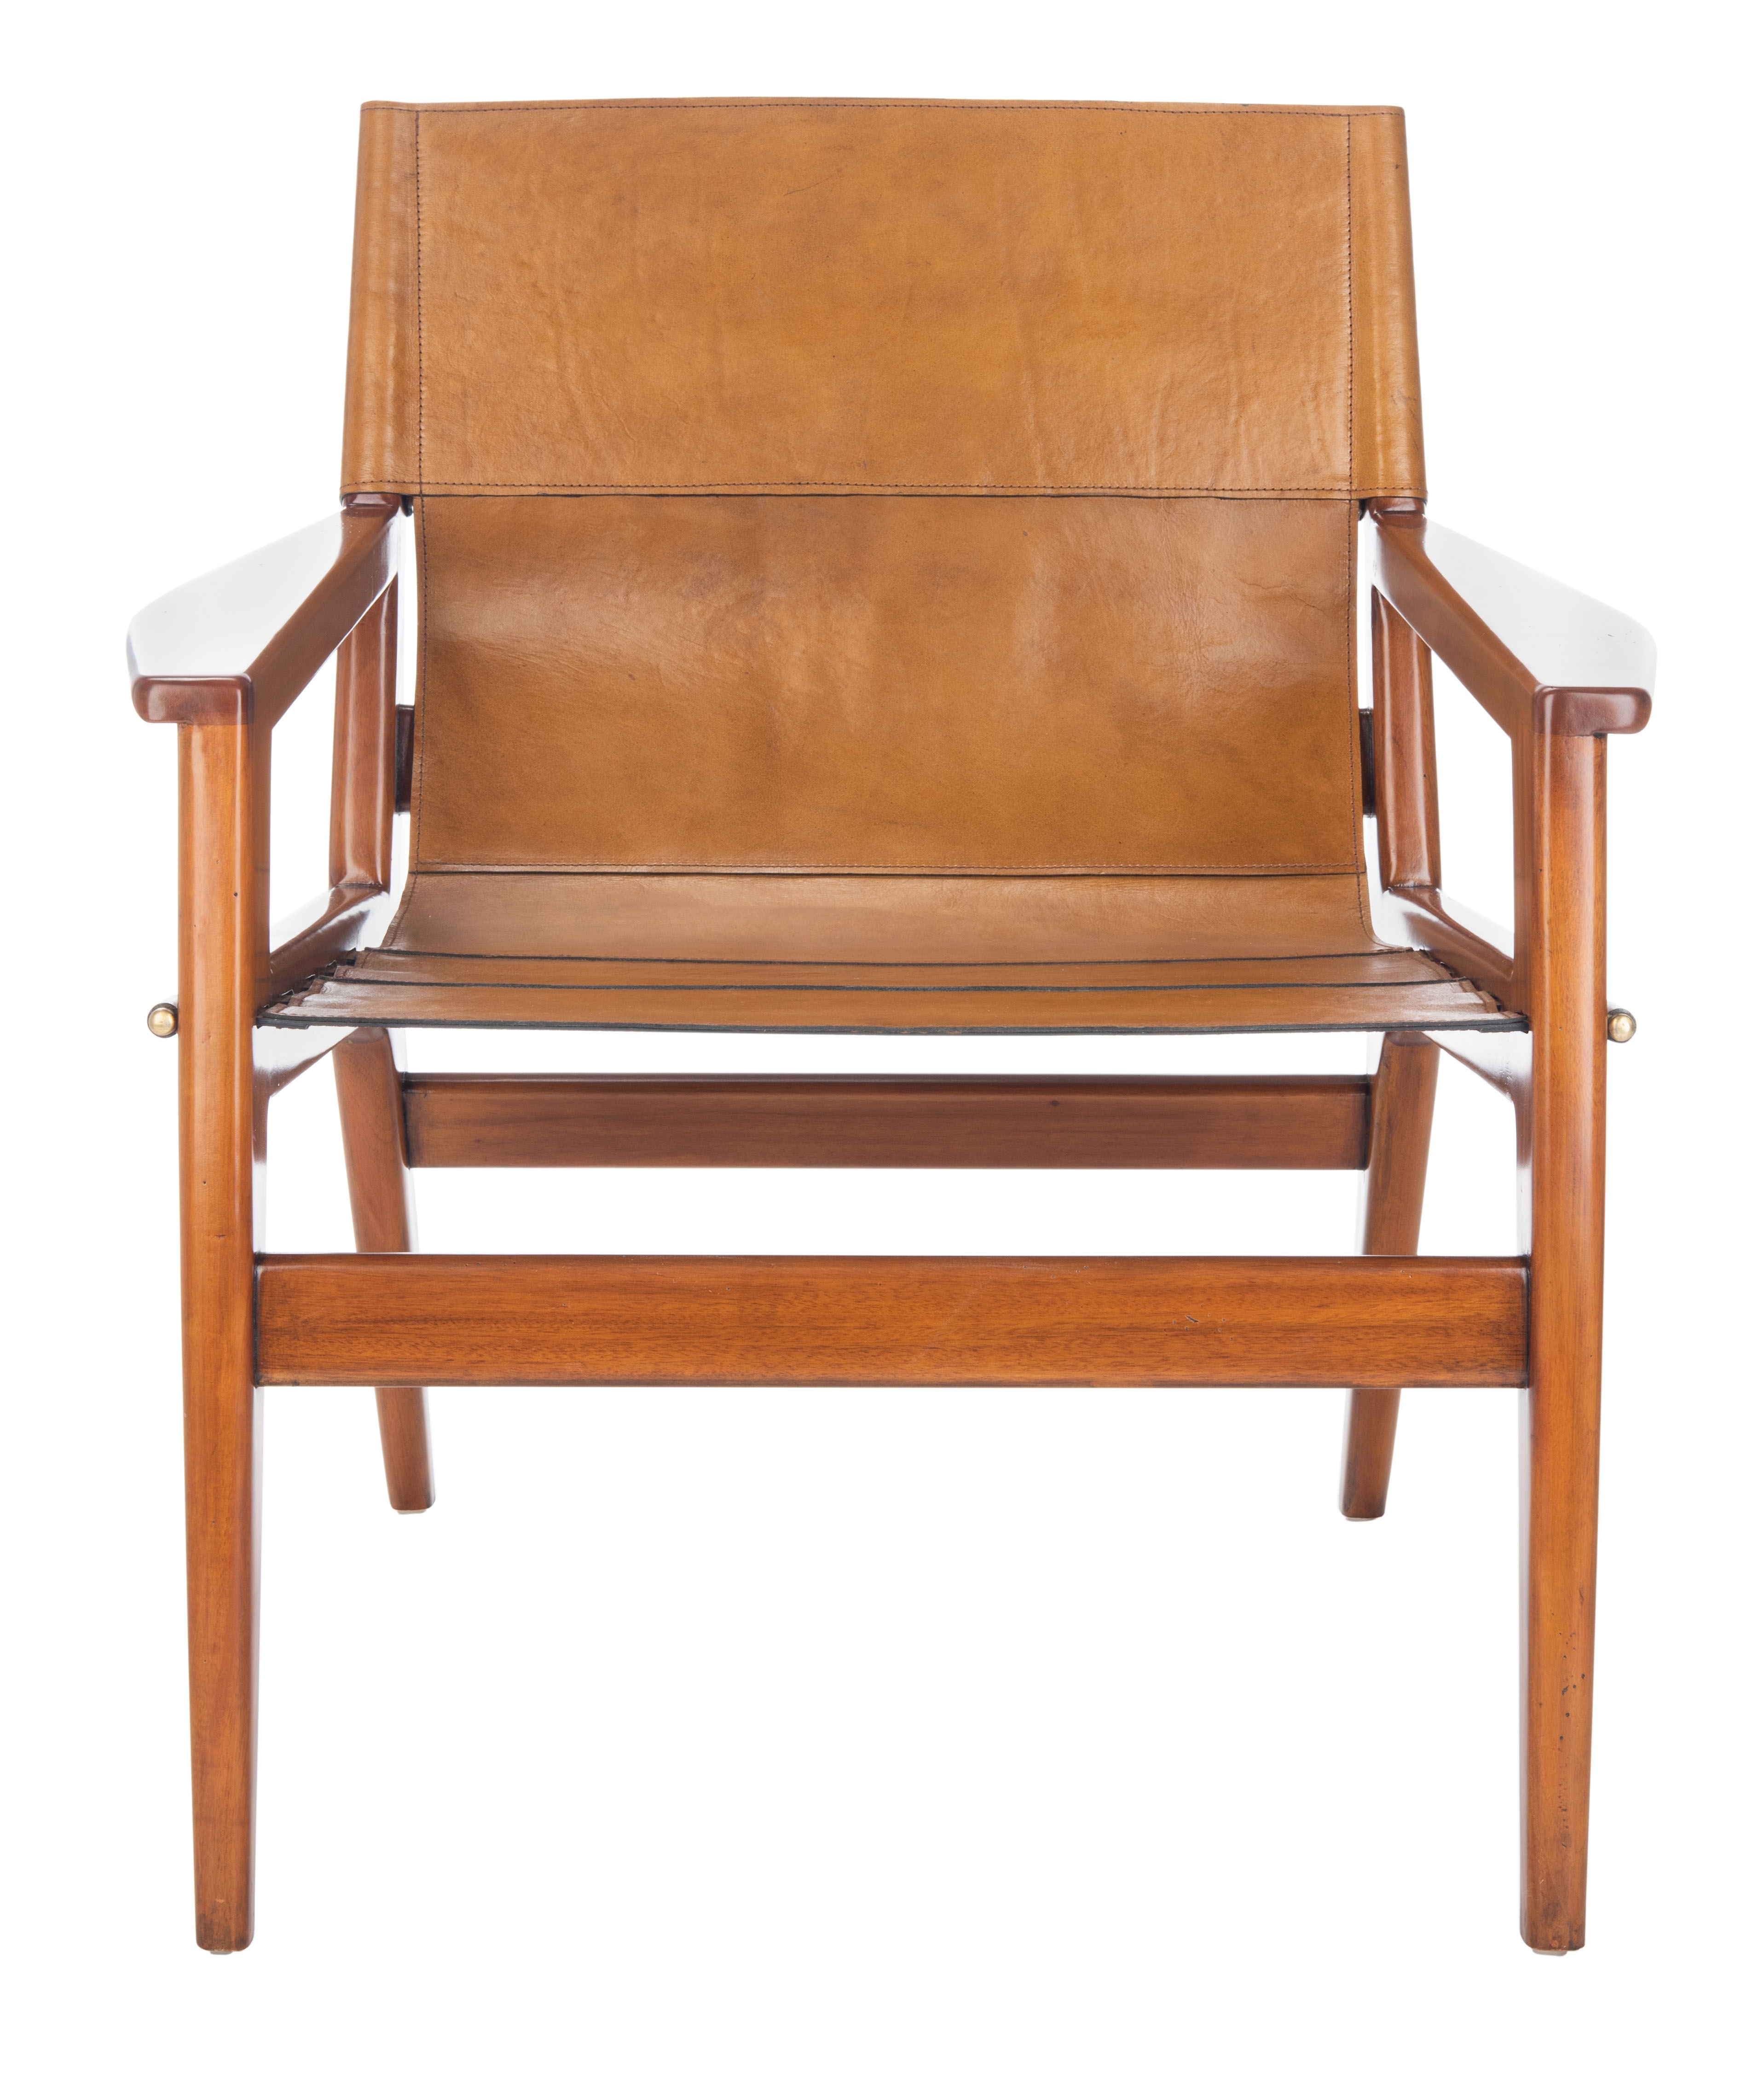 Culkin Leather Sling Chair - Brown - Arlo Home - Image 0